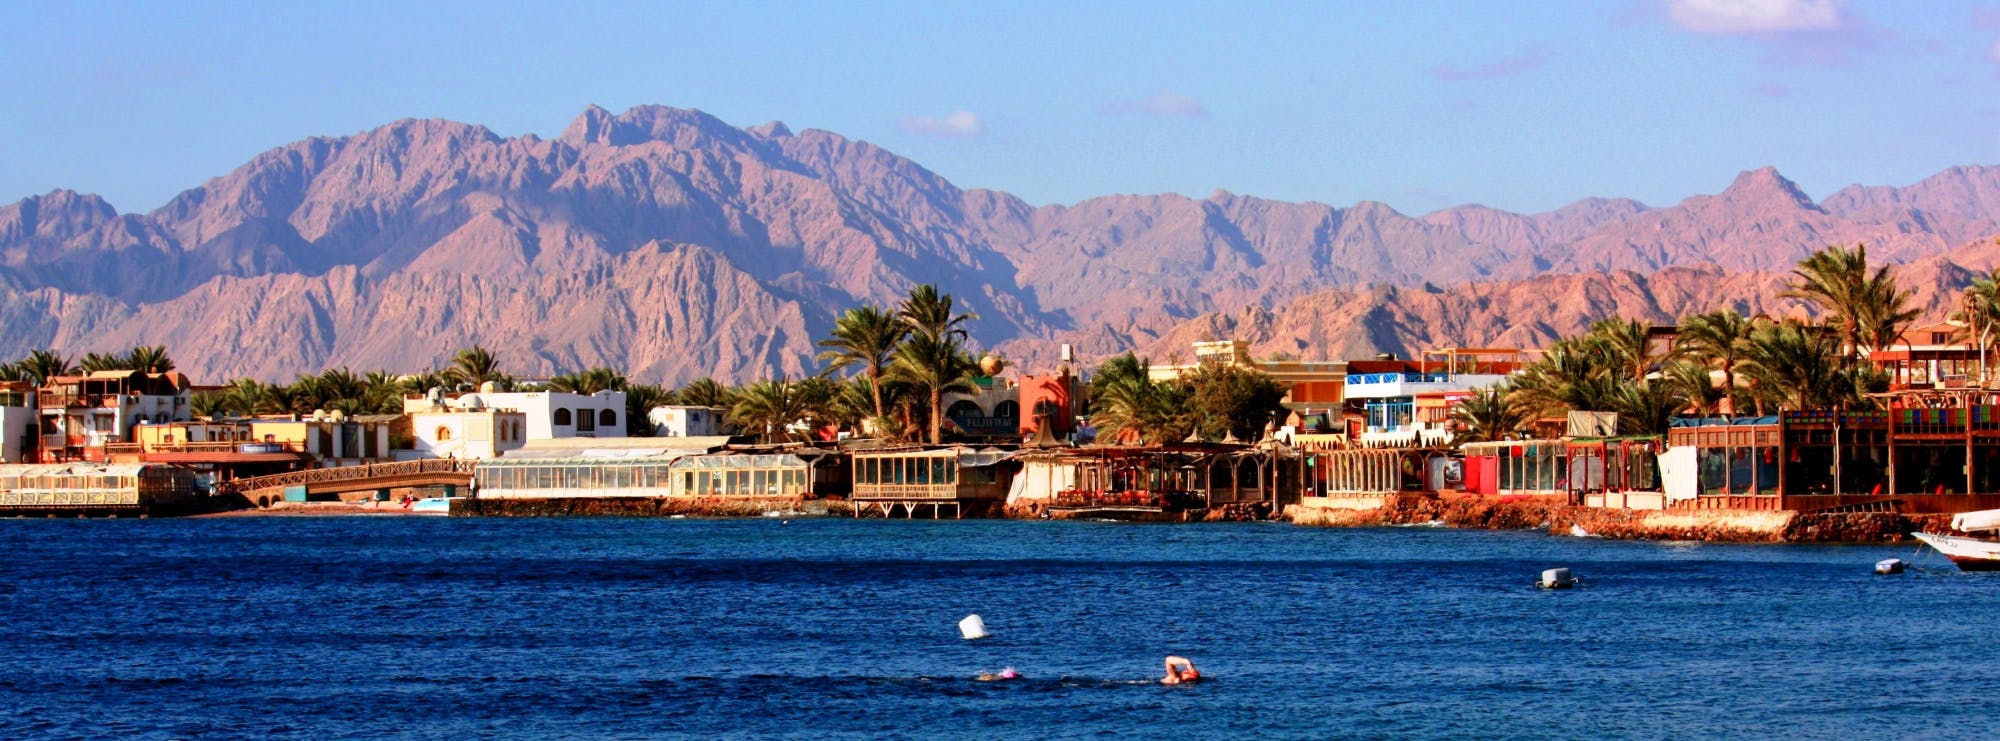 Full-day Royal Seascope and snorkeling cruise with lunch from Dahab